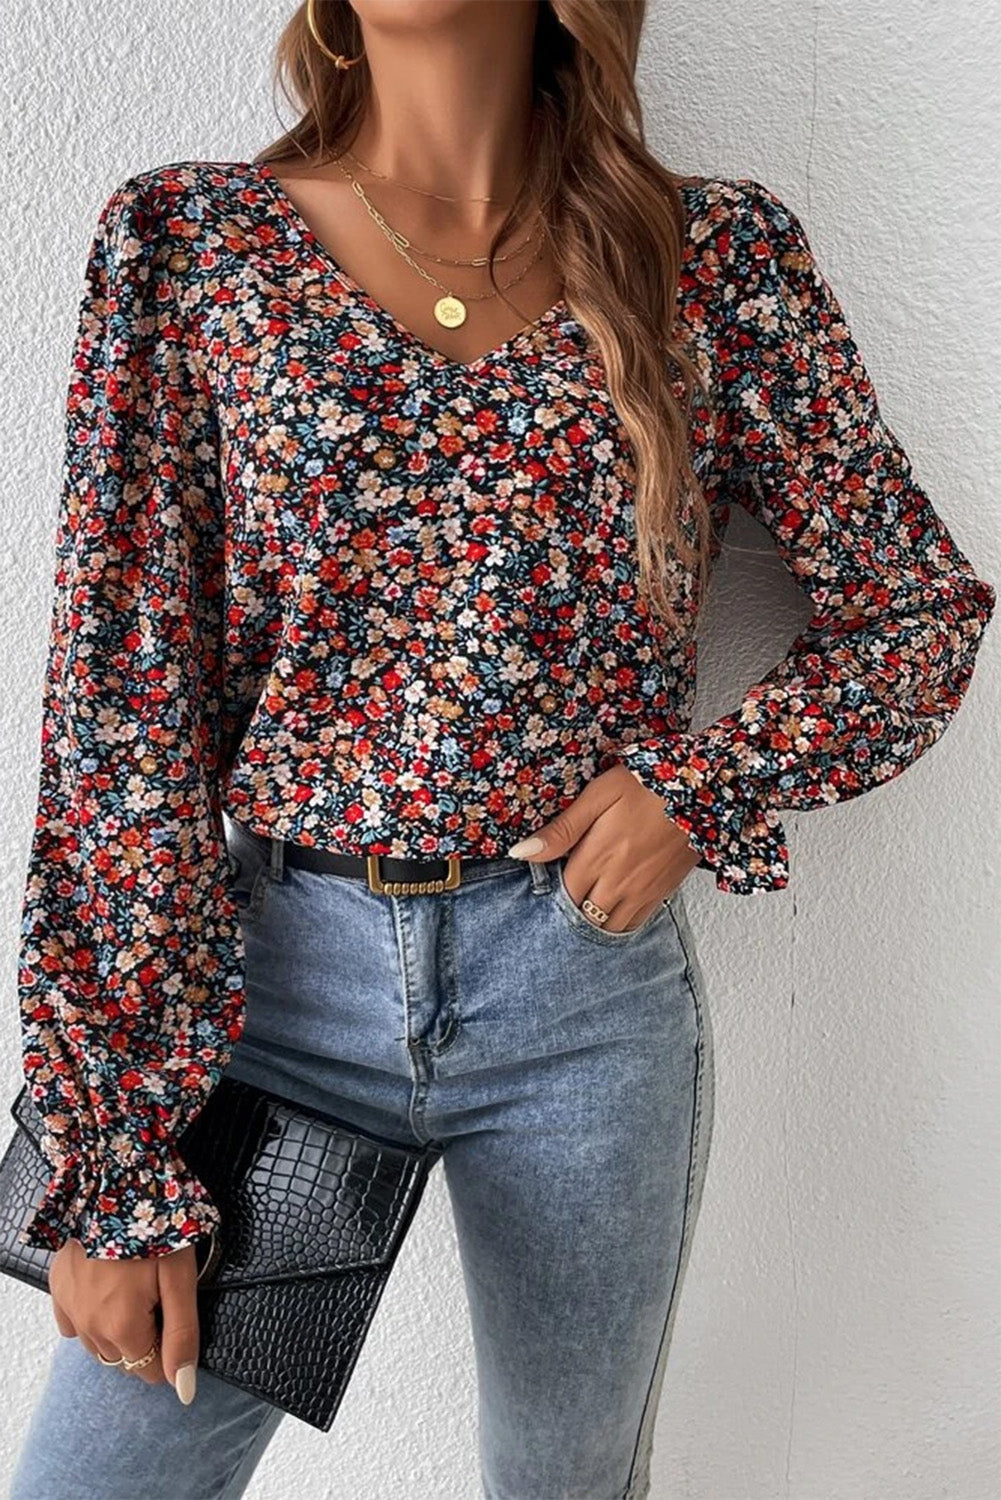 V-Neck Printed Long Sleeve Blouse - Women’s Clothing & Accessories - Shirts & Tops - 4 - 2024